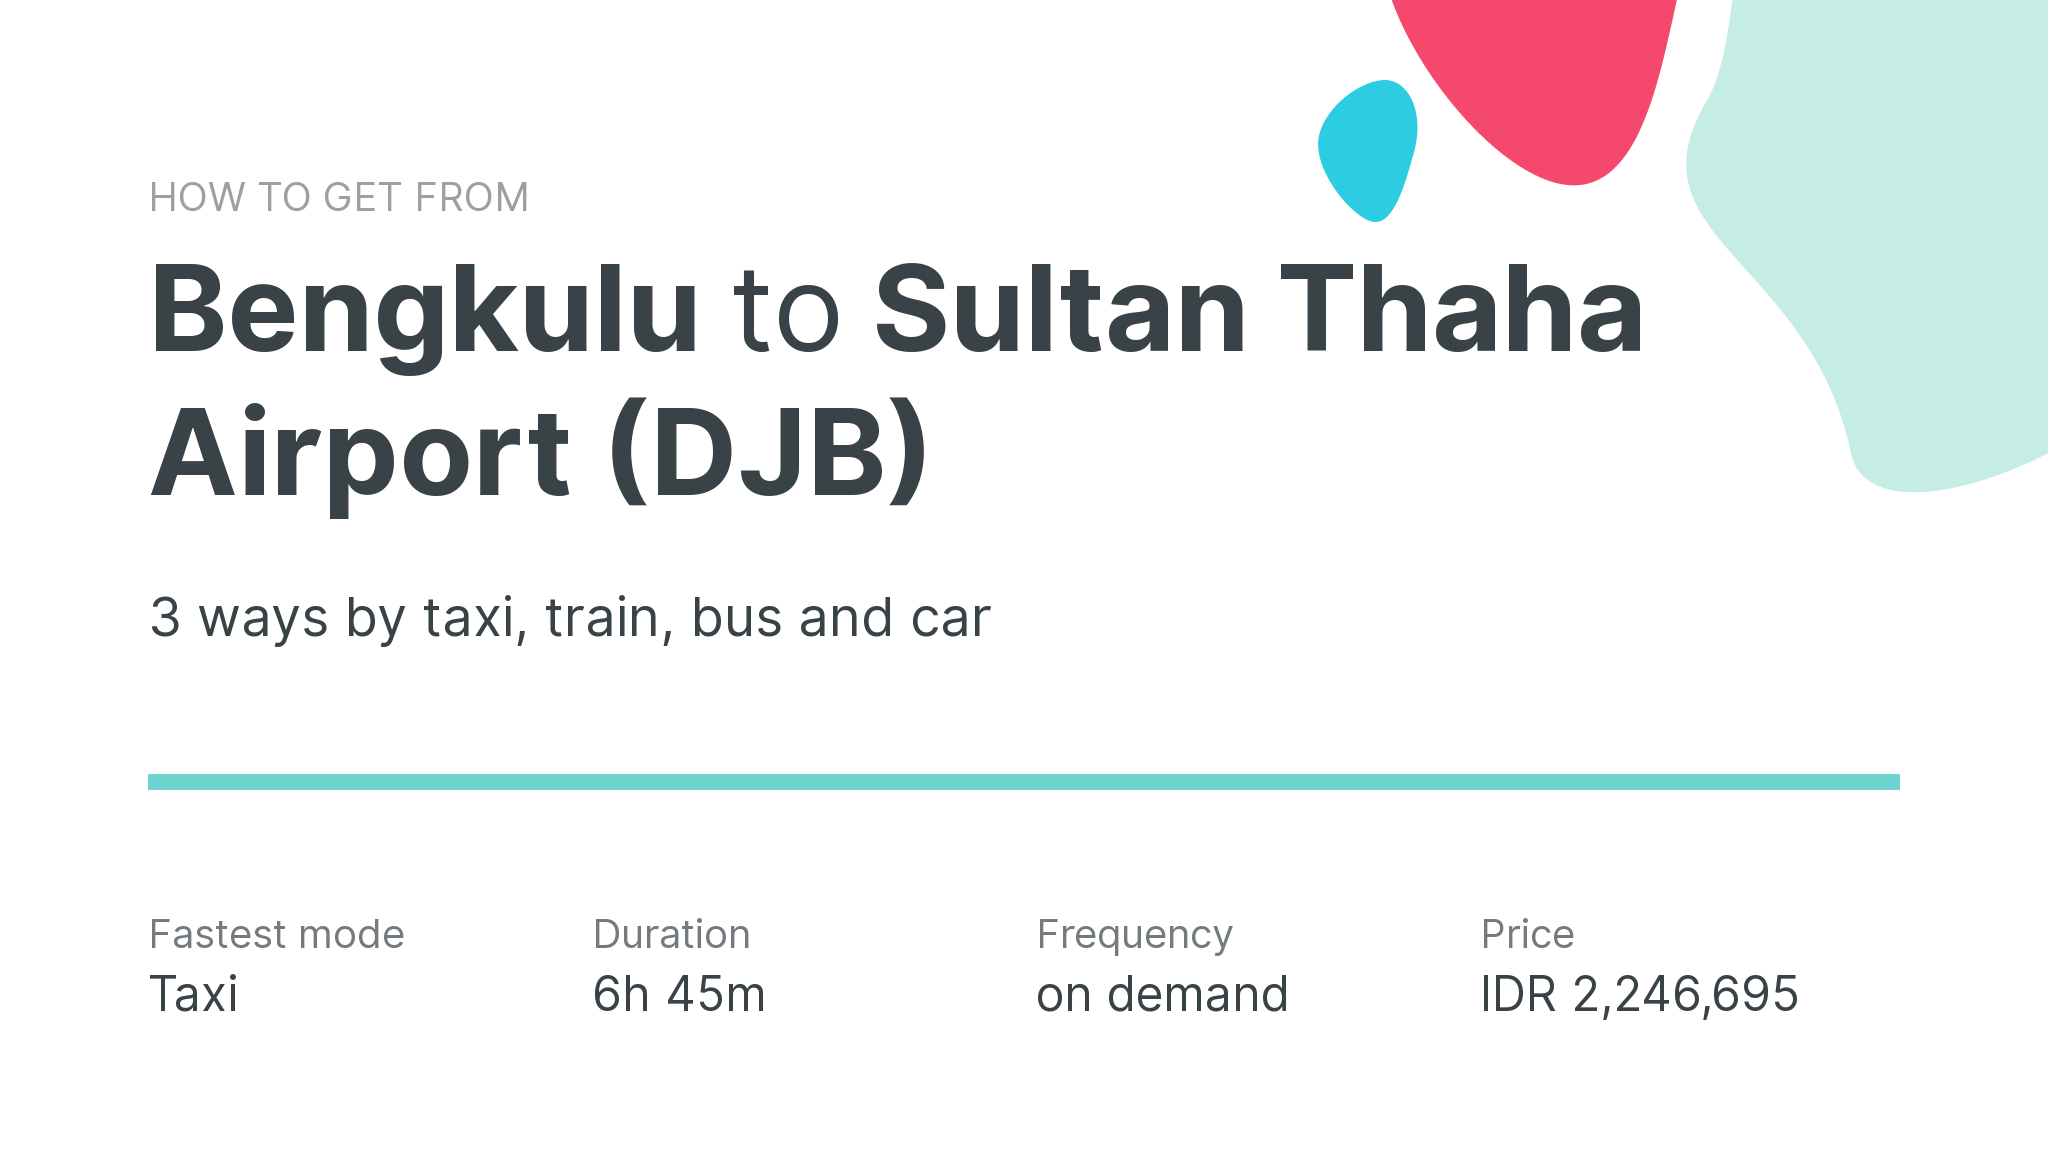 How do I get from Bengkulu to Sultan Thaha Airport (DJB)